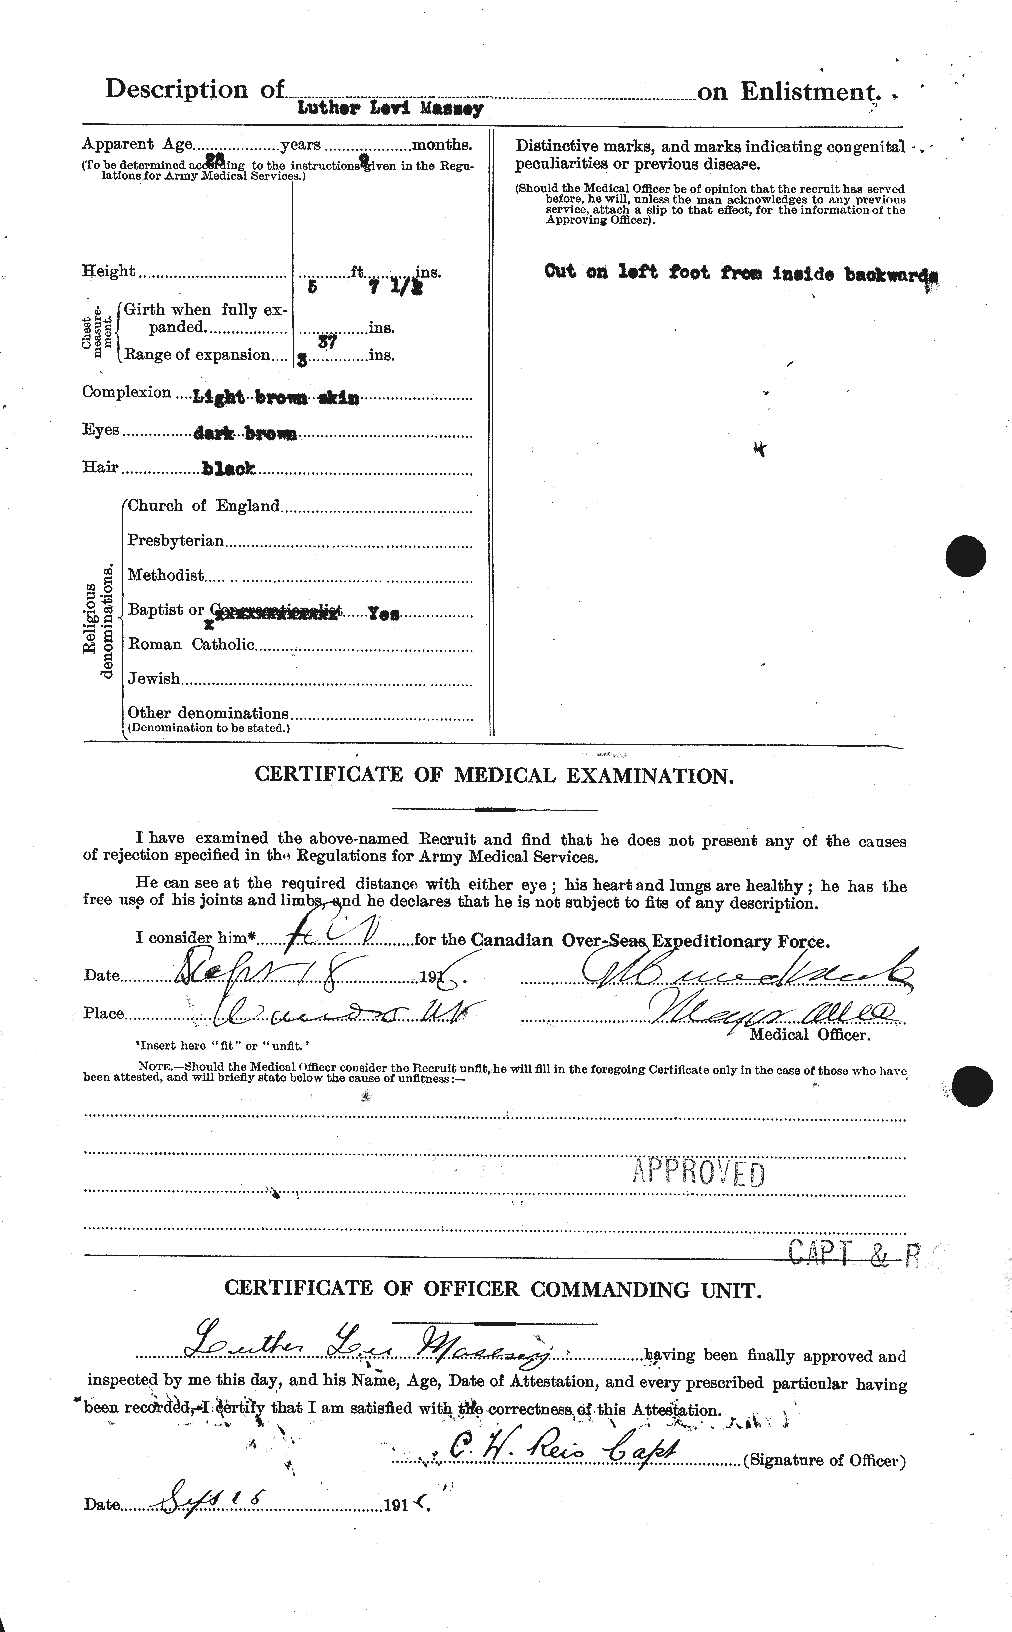 Personnel Records of the First World War - CEF 487087b